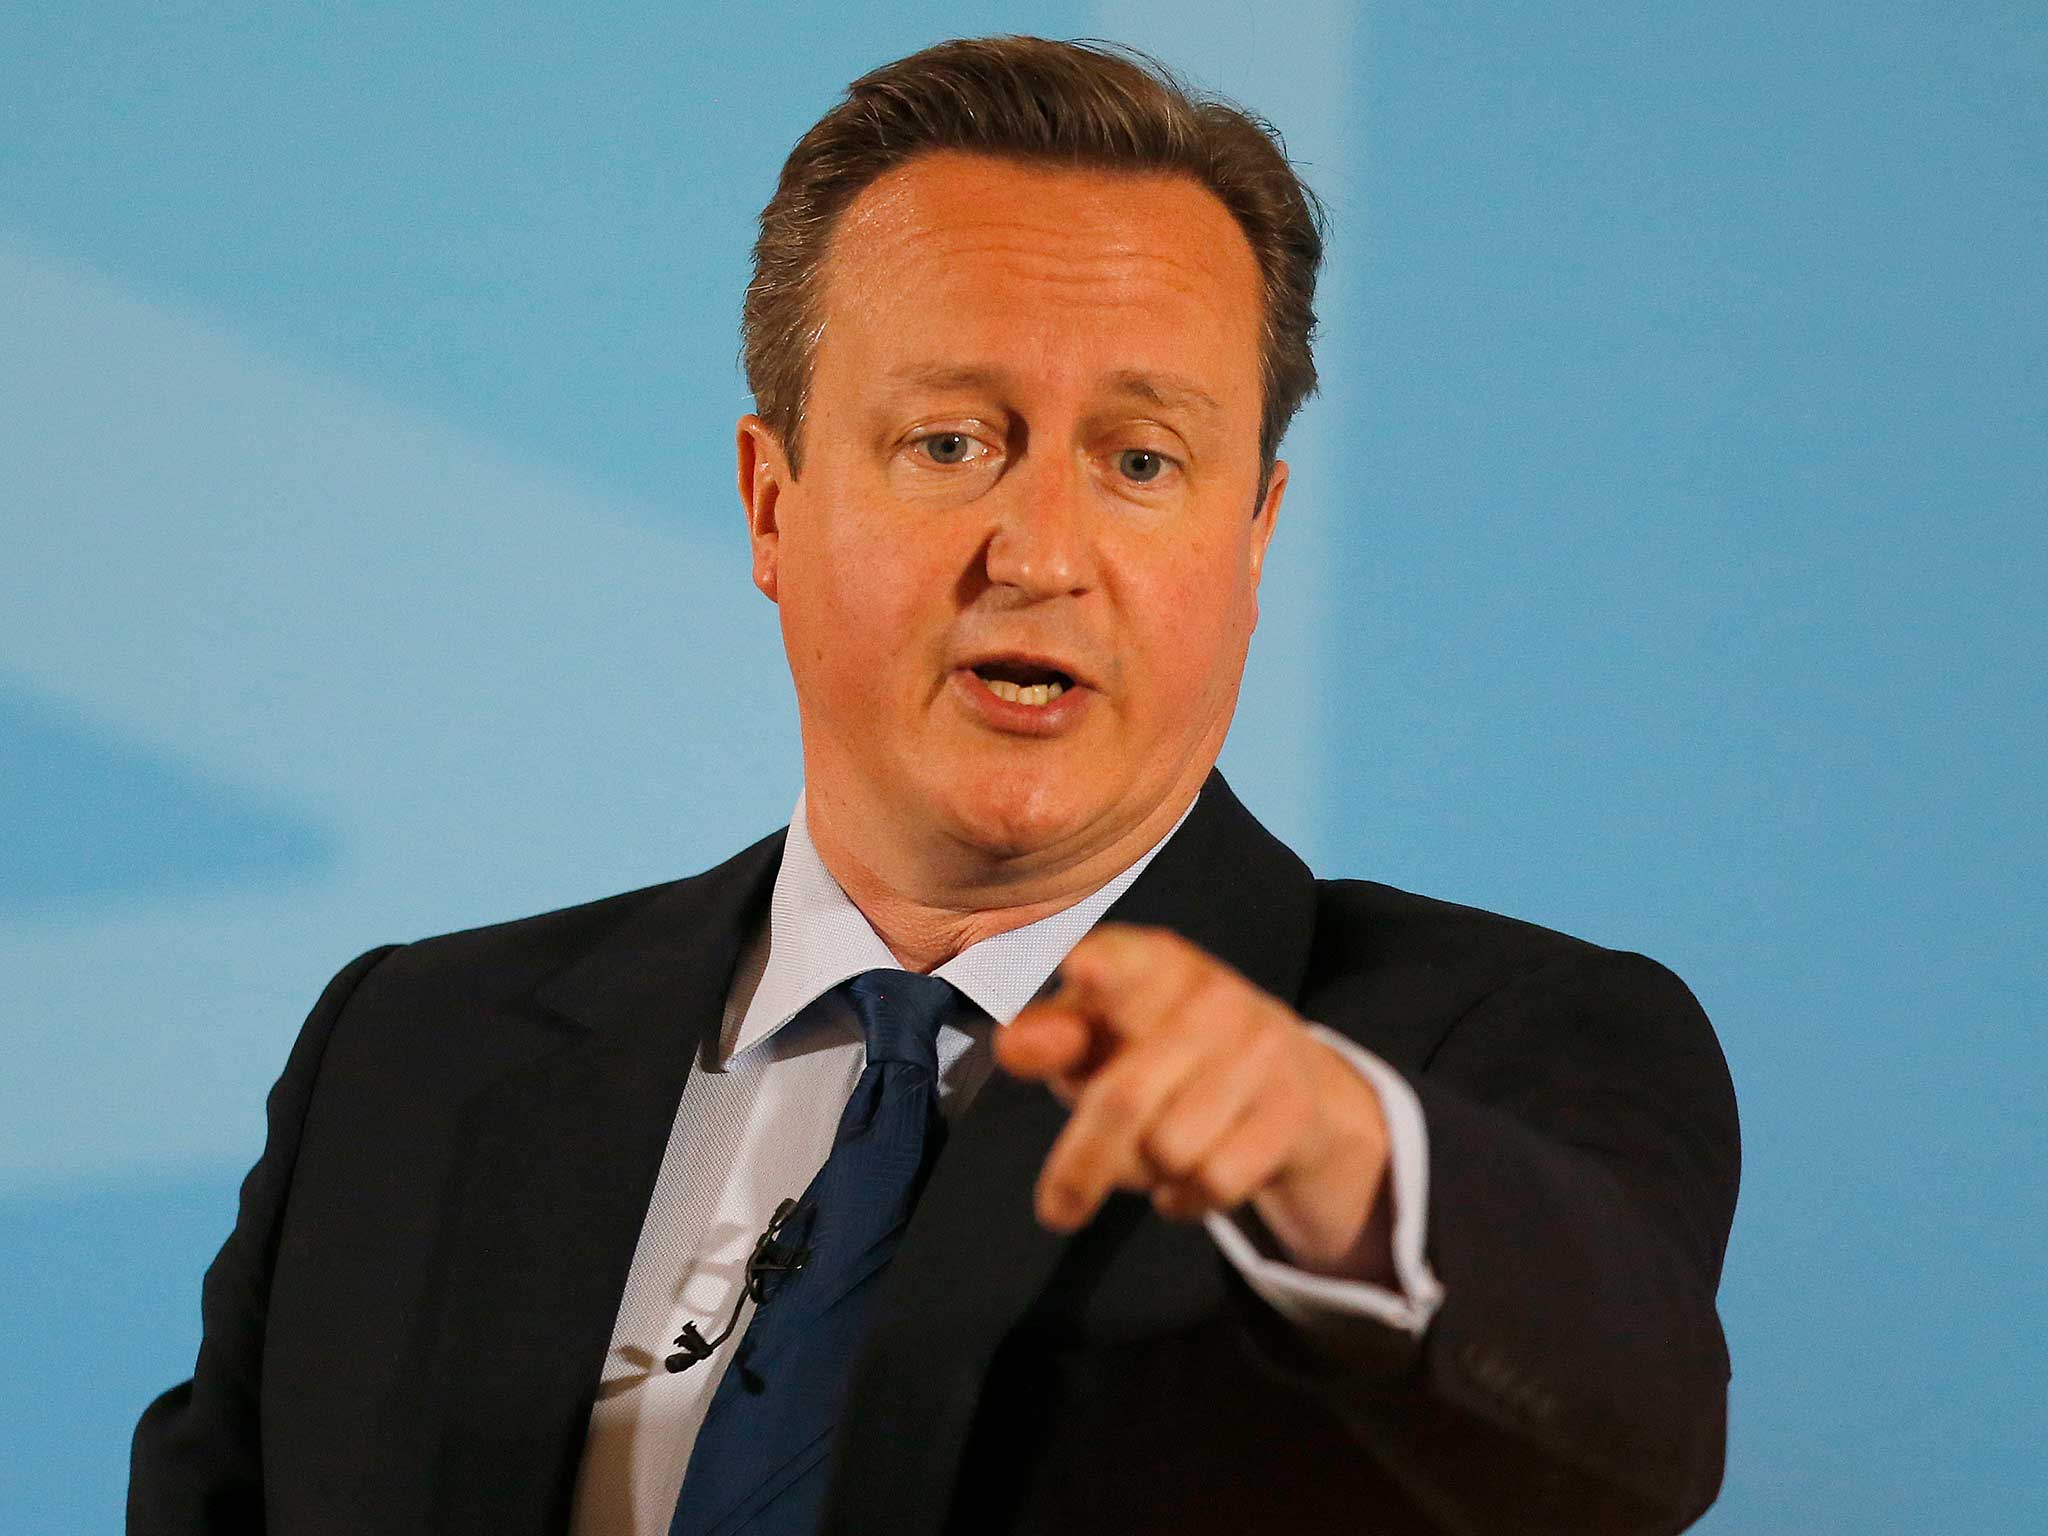 David Cameron has been urged to challenge extremist ideas instead of banning them